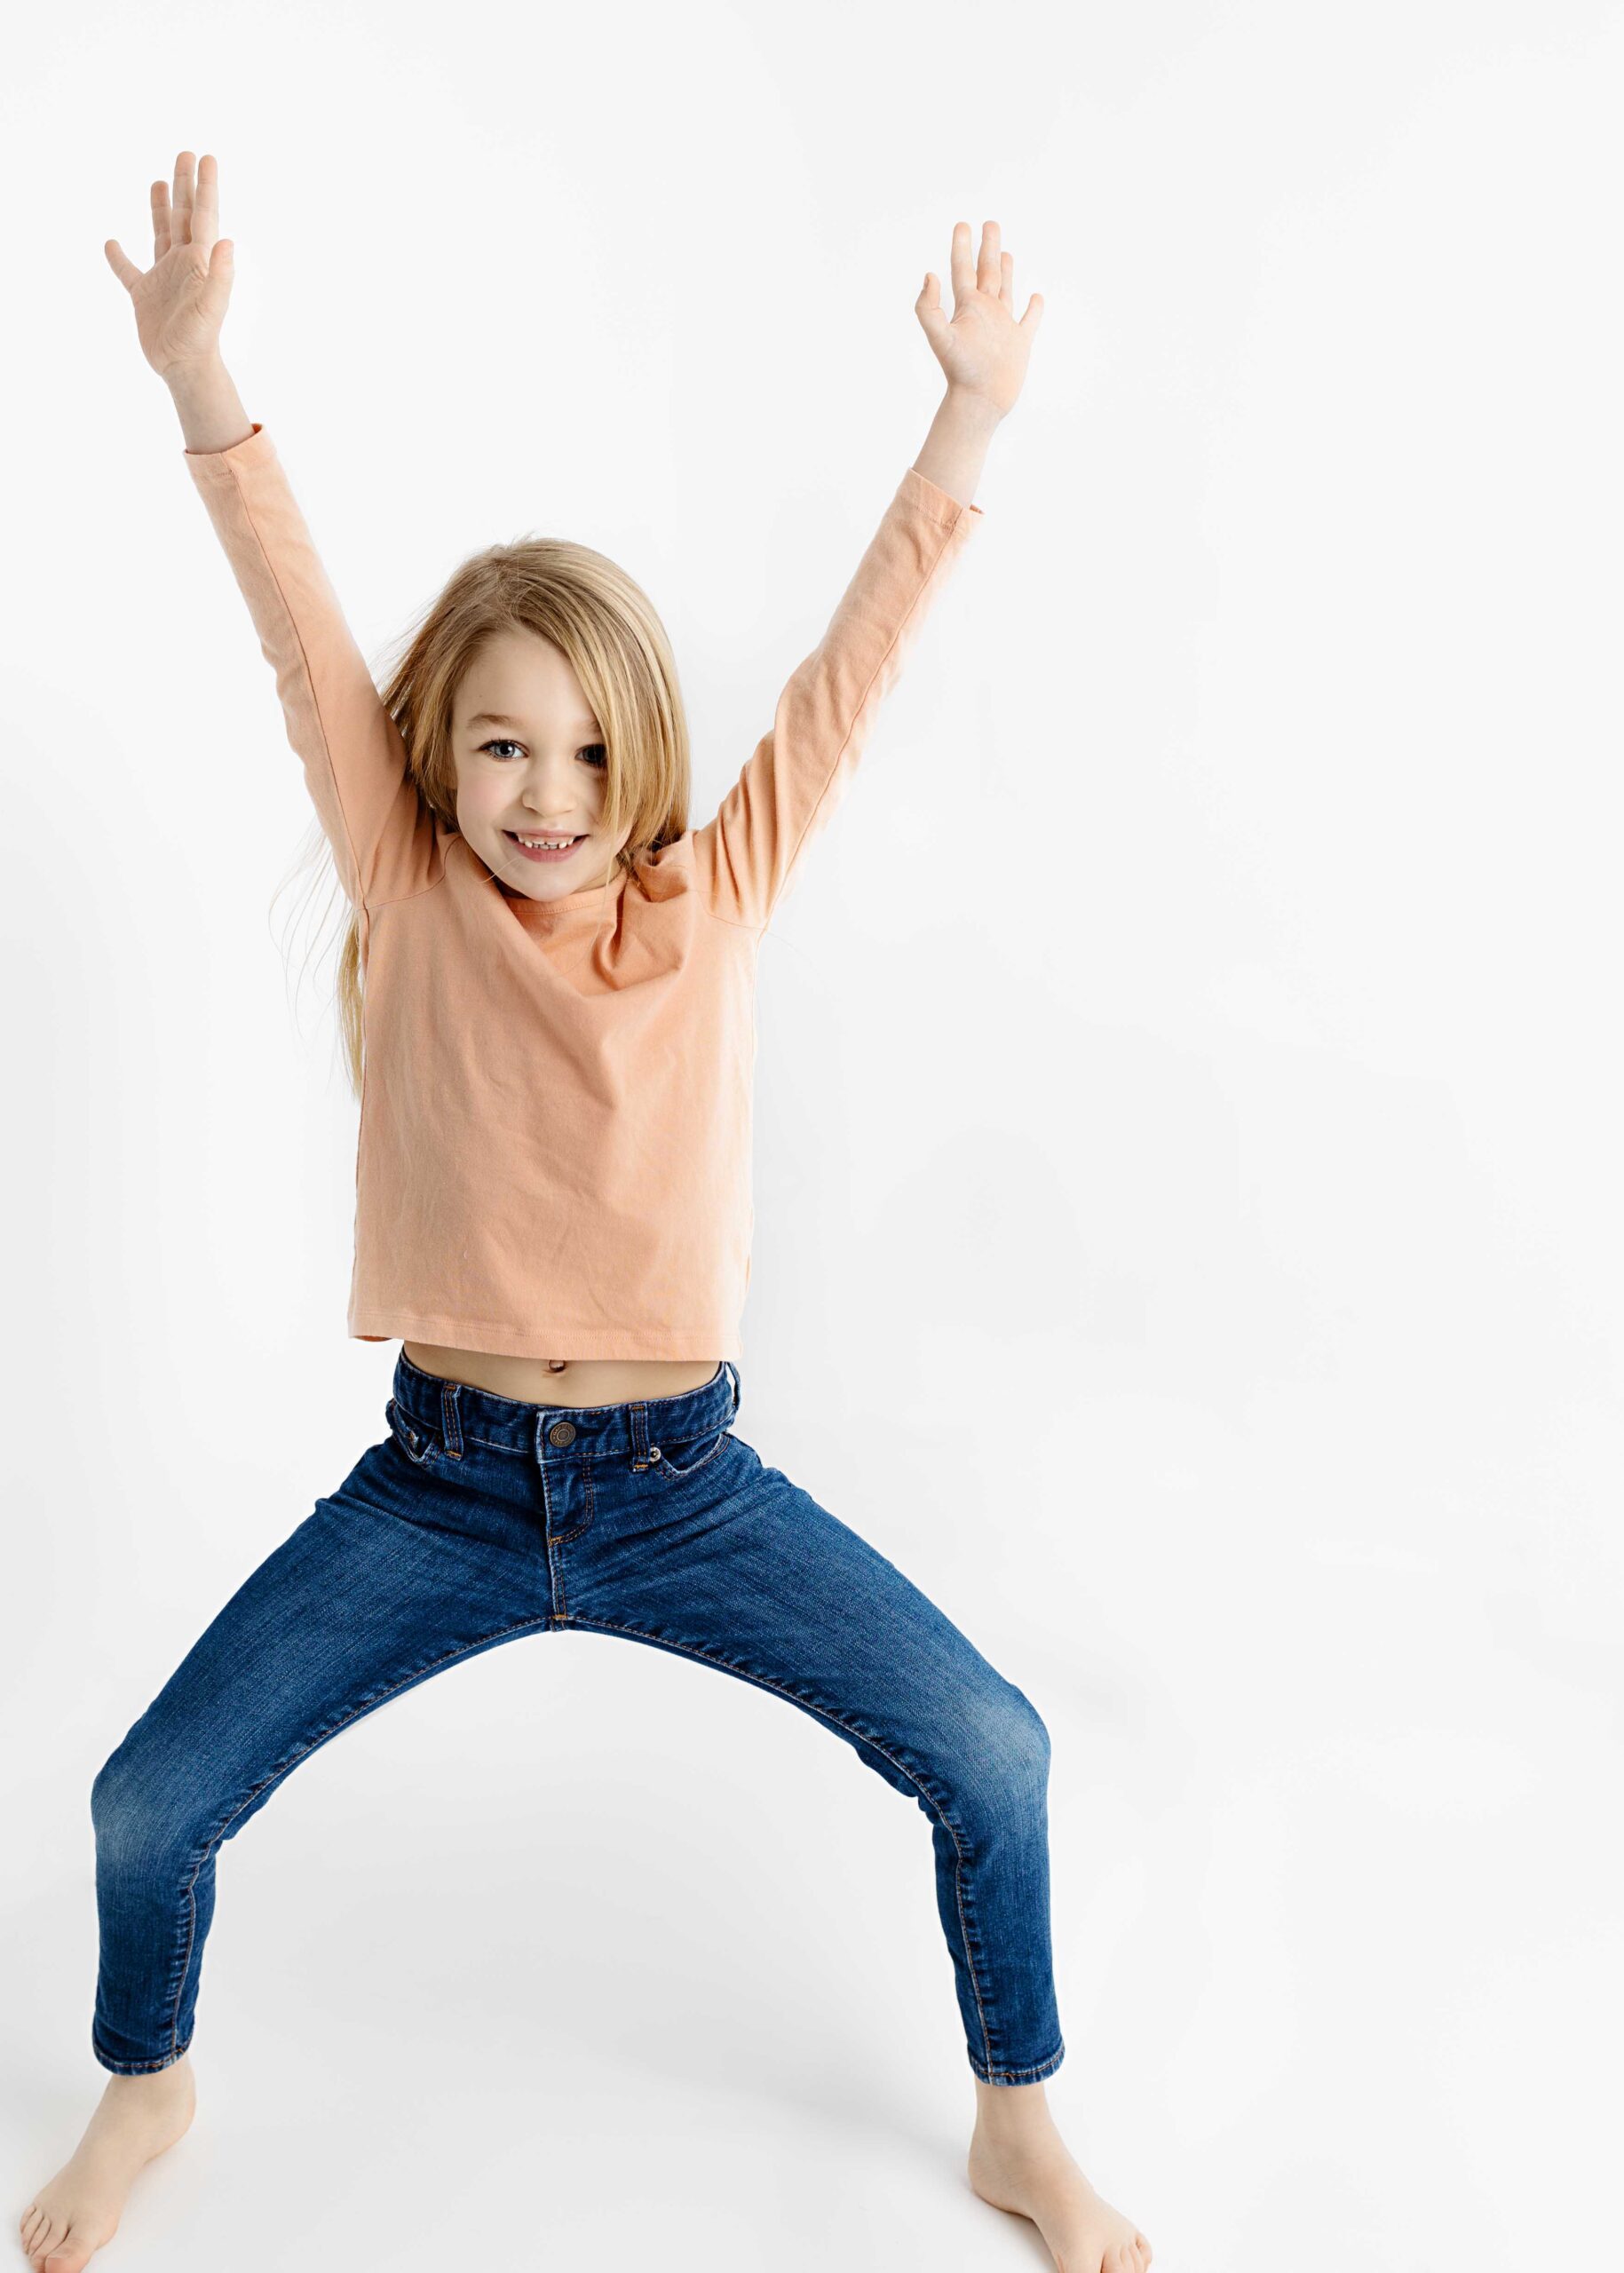 little girl with outstretched legs and arms smiling for the camera